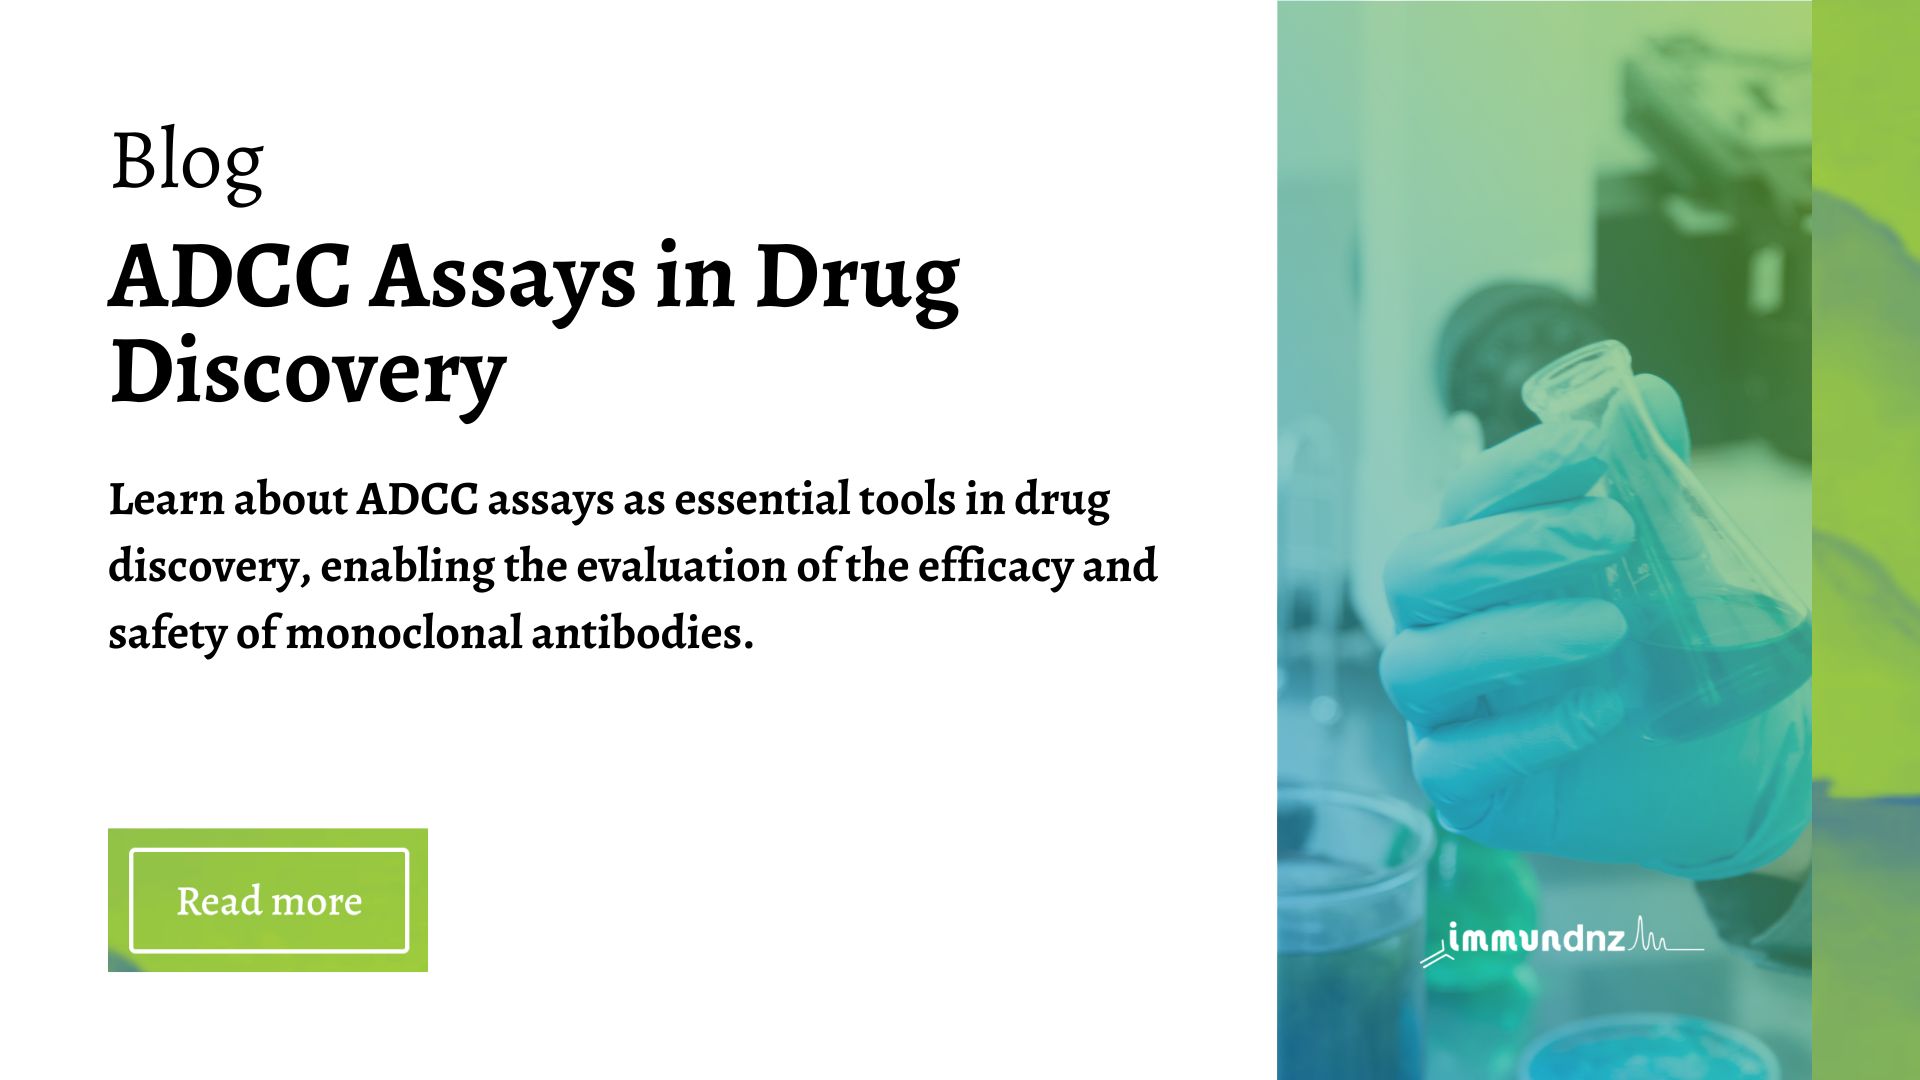 ADCC assays in drug discovery